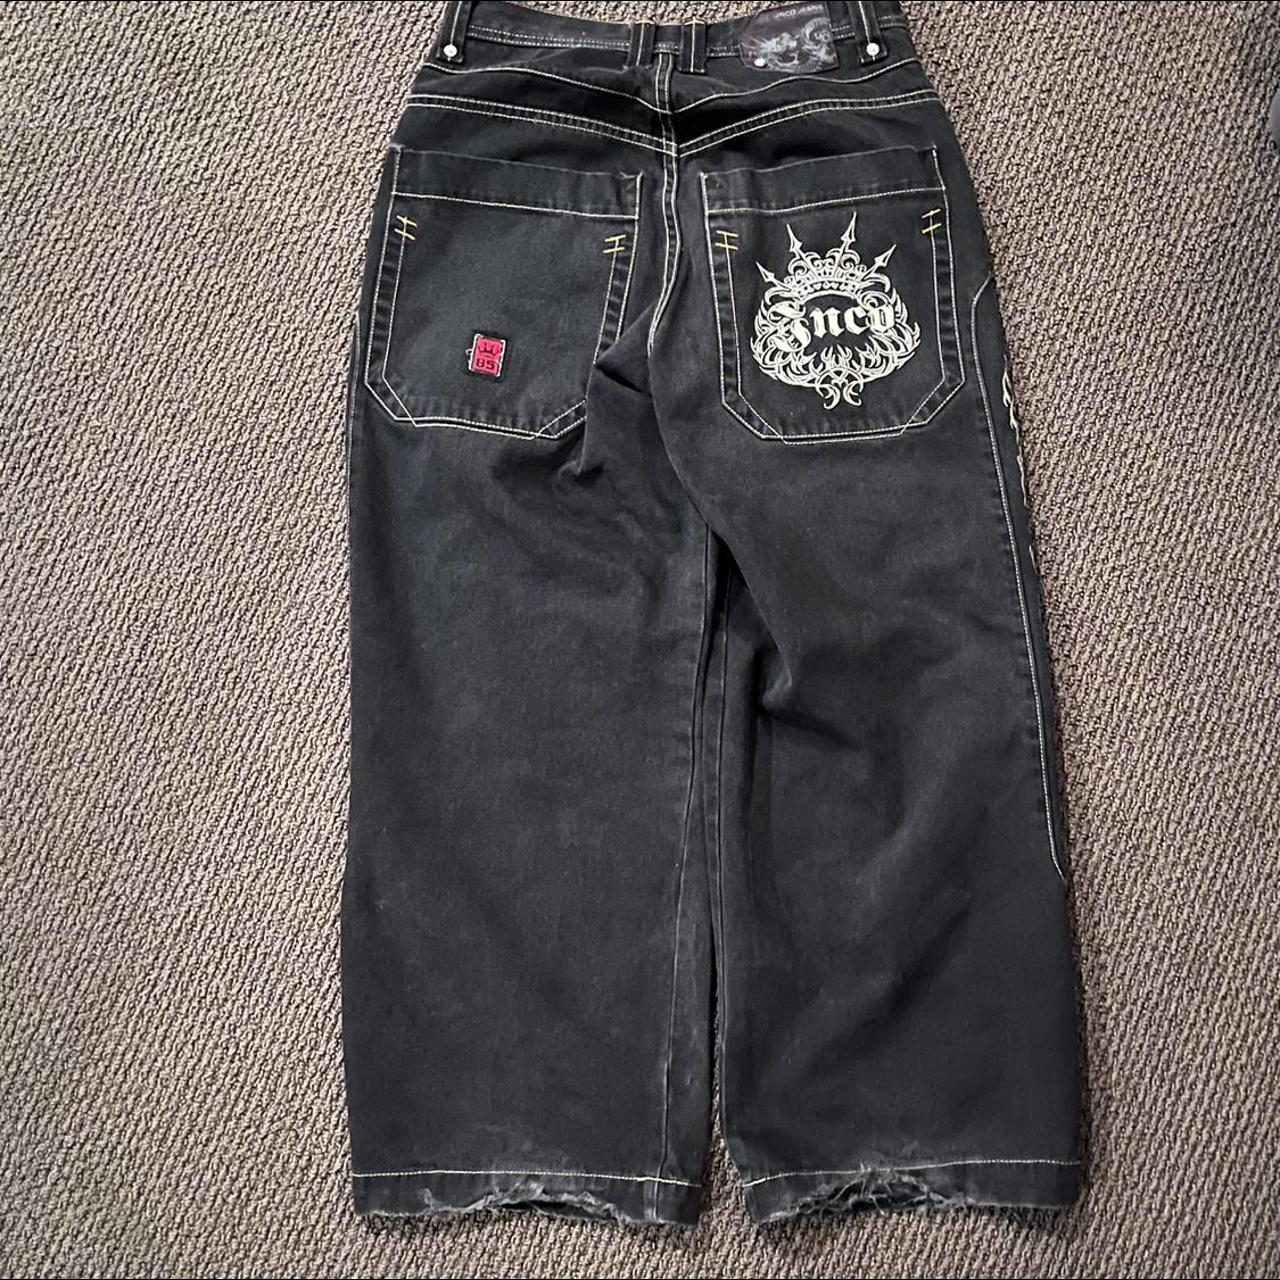 TRIBAL JNCO JEANS **DO NOT BUY I WILL SEND YOU A... - Depop